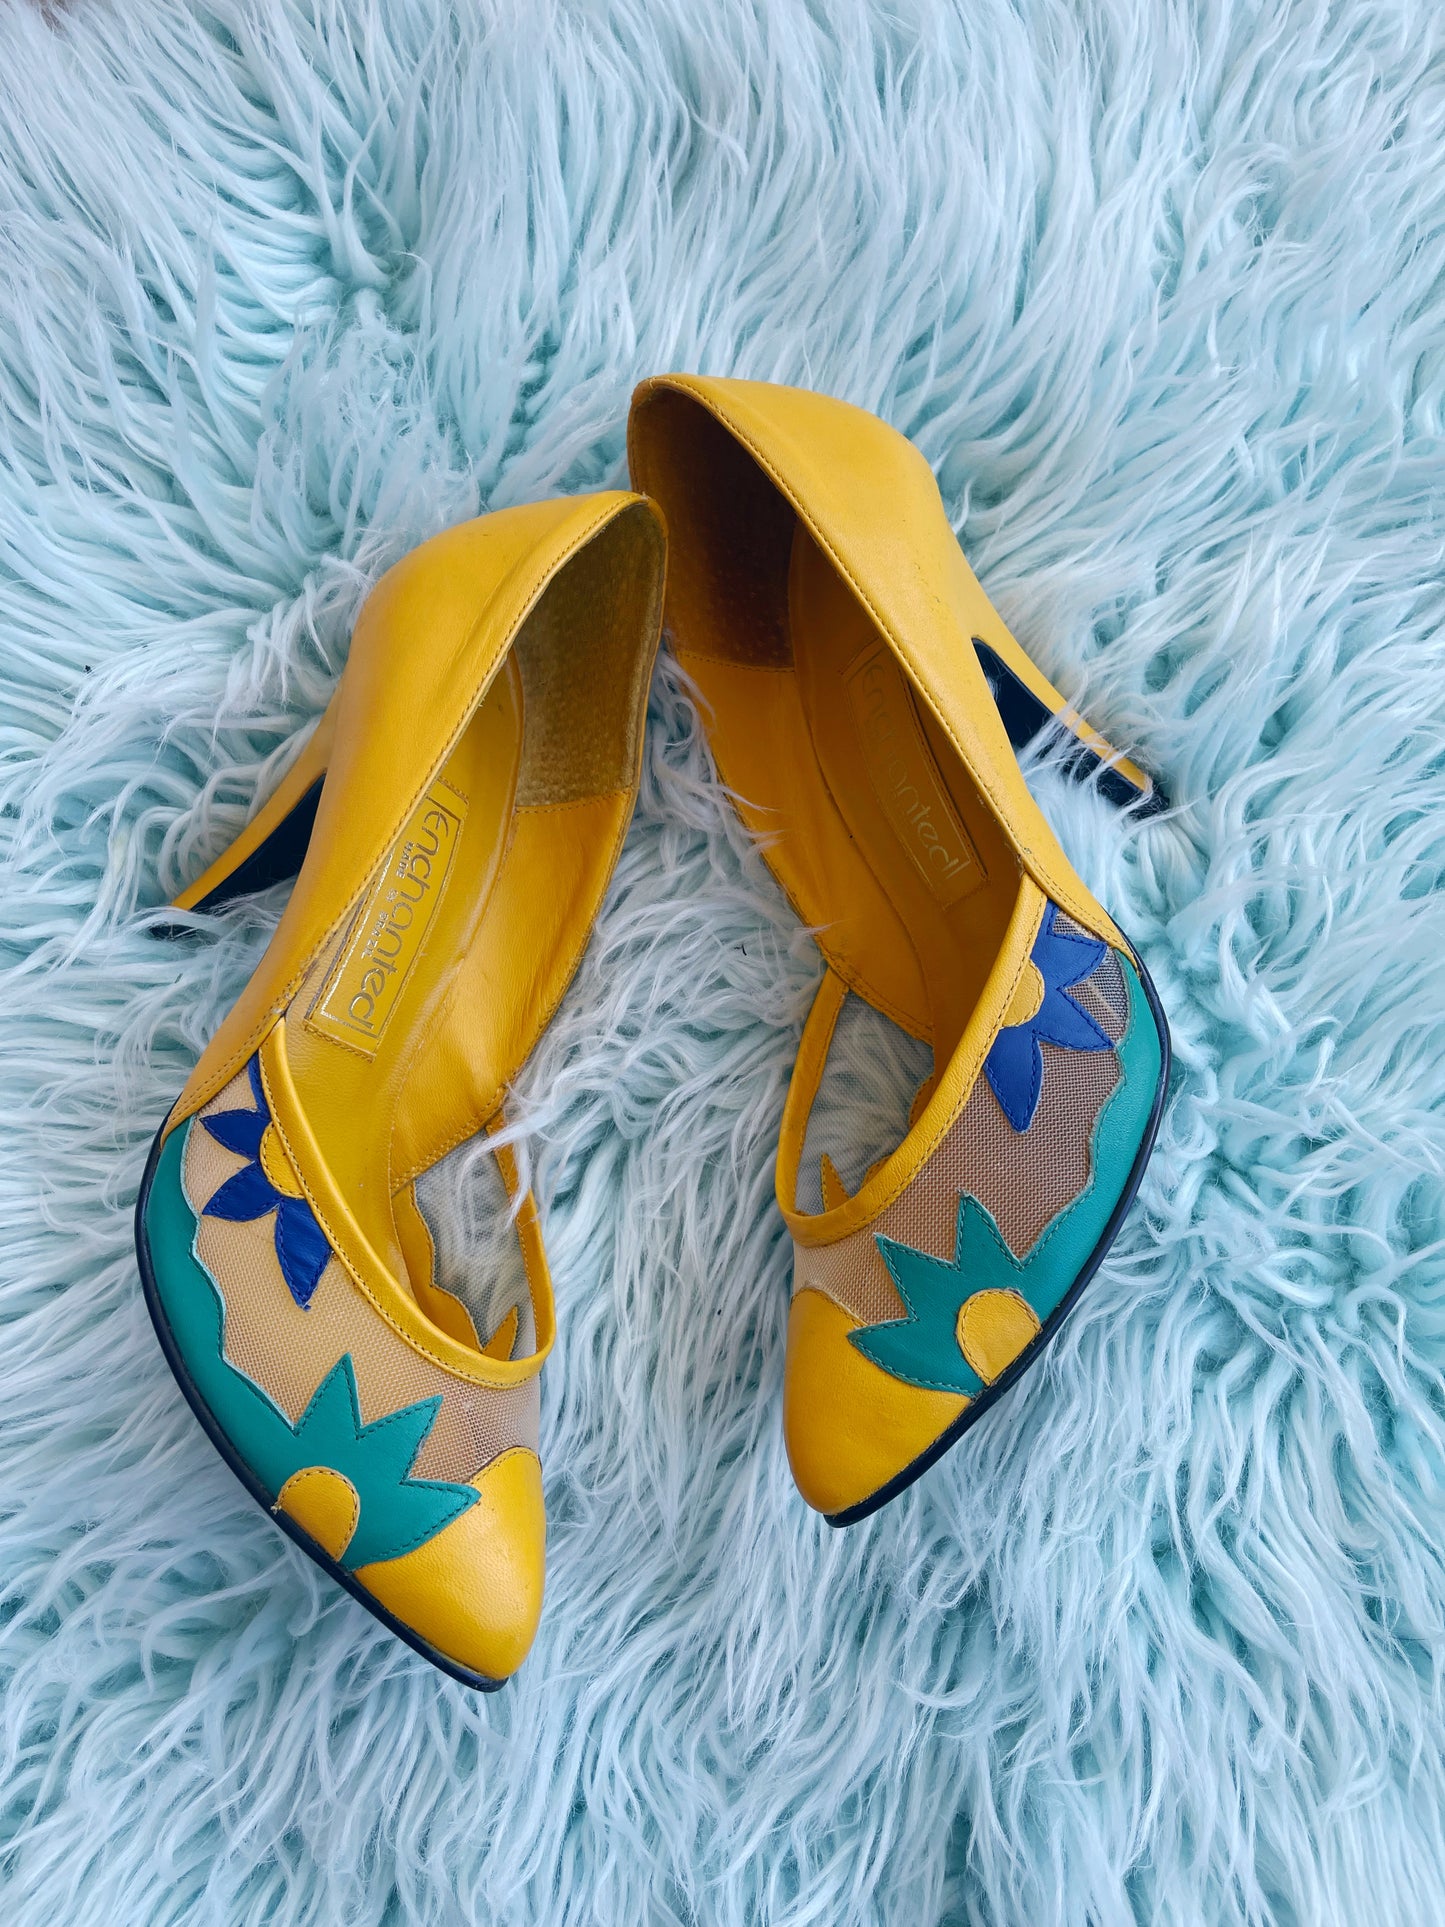 Vintage 70s / 80s "Enchanted" Made in Brazil Mustard Yellow Mesh Toe Flower Design Leather 4” heels size 8 *Original Shoe Box Not Included*